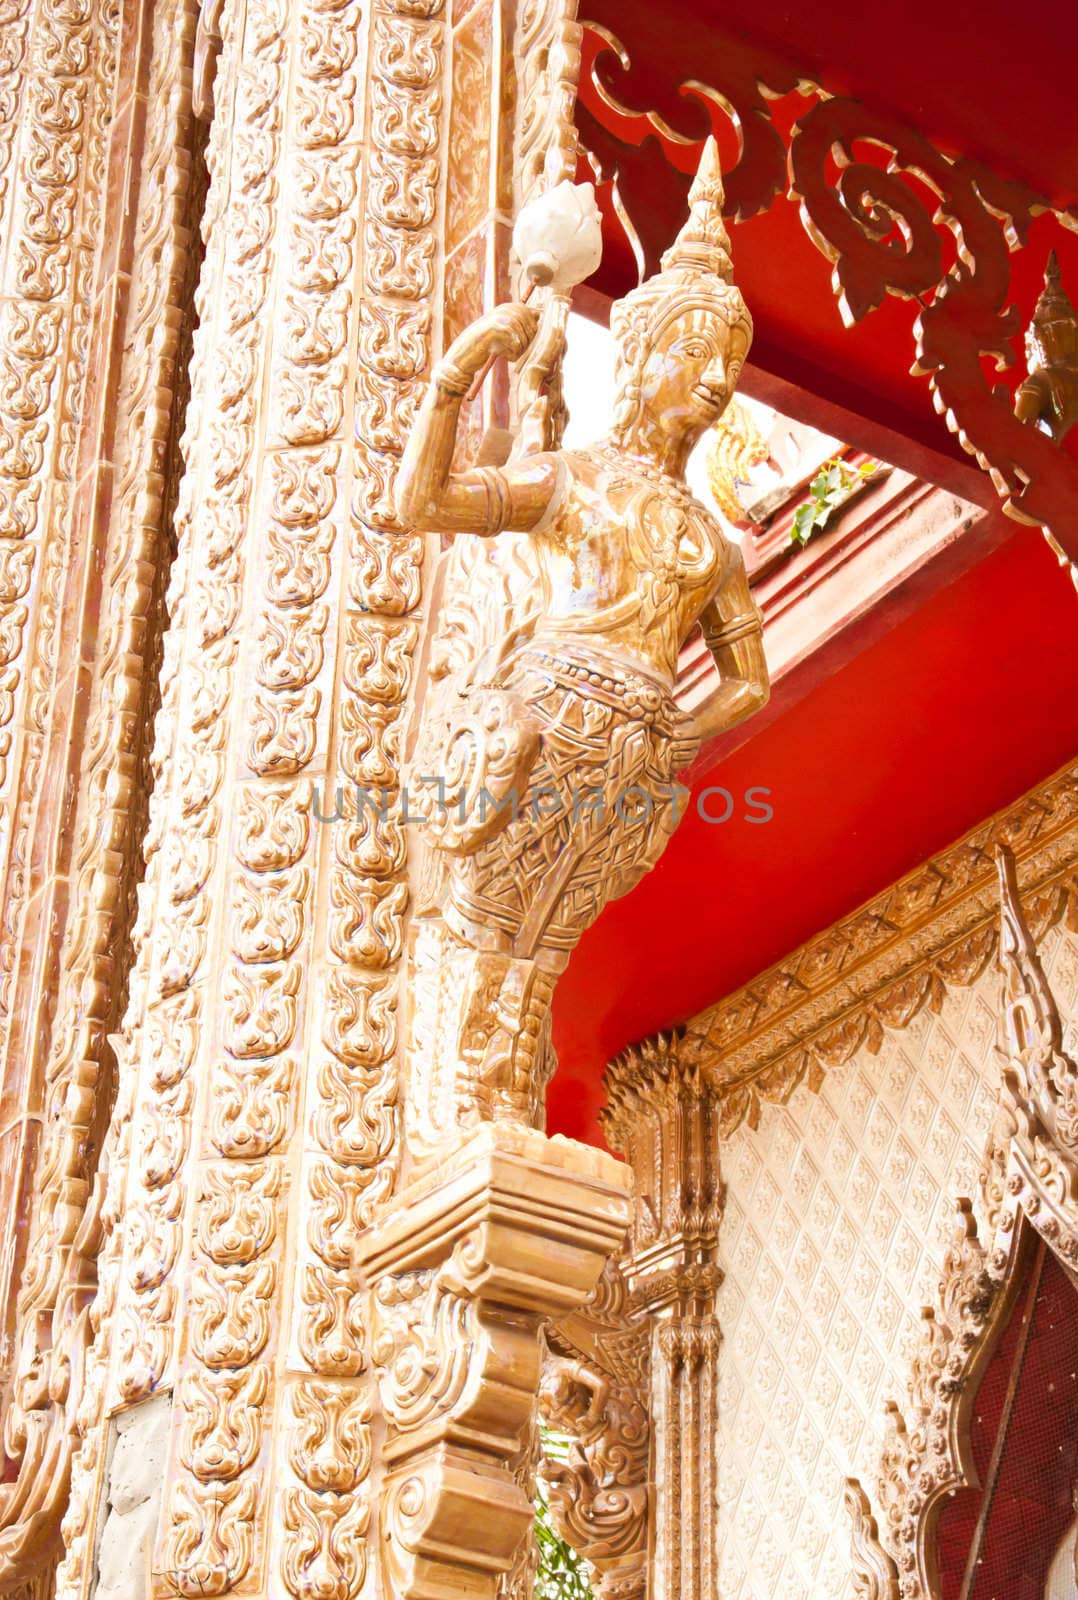 Phetchaburi, Thailand - June 13 : at wat kuti in Phetchaburi Province.
have the wall sculptures of traditional Thai style  and this is a pole of the temple in Thailand. The architecture is beautiful.